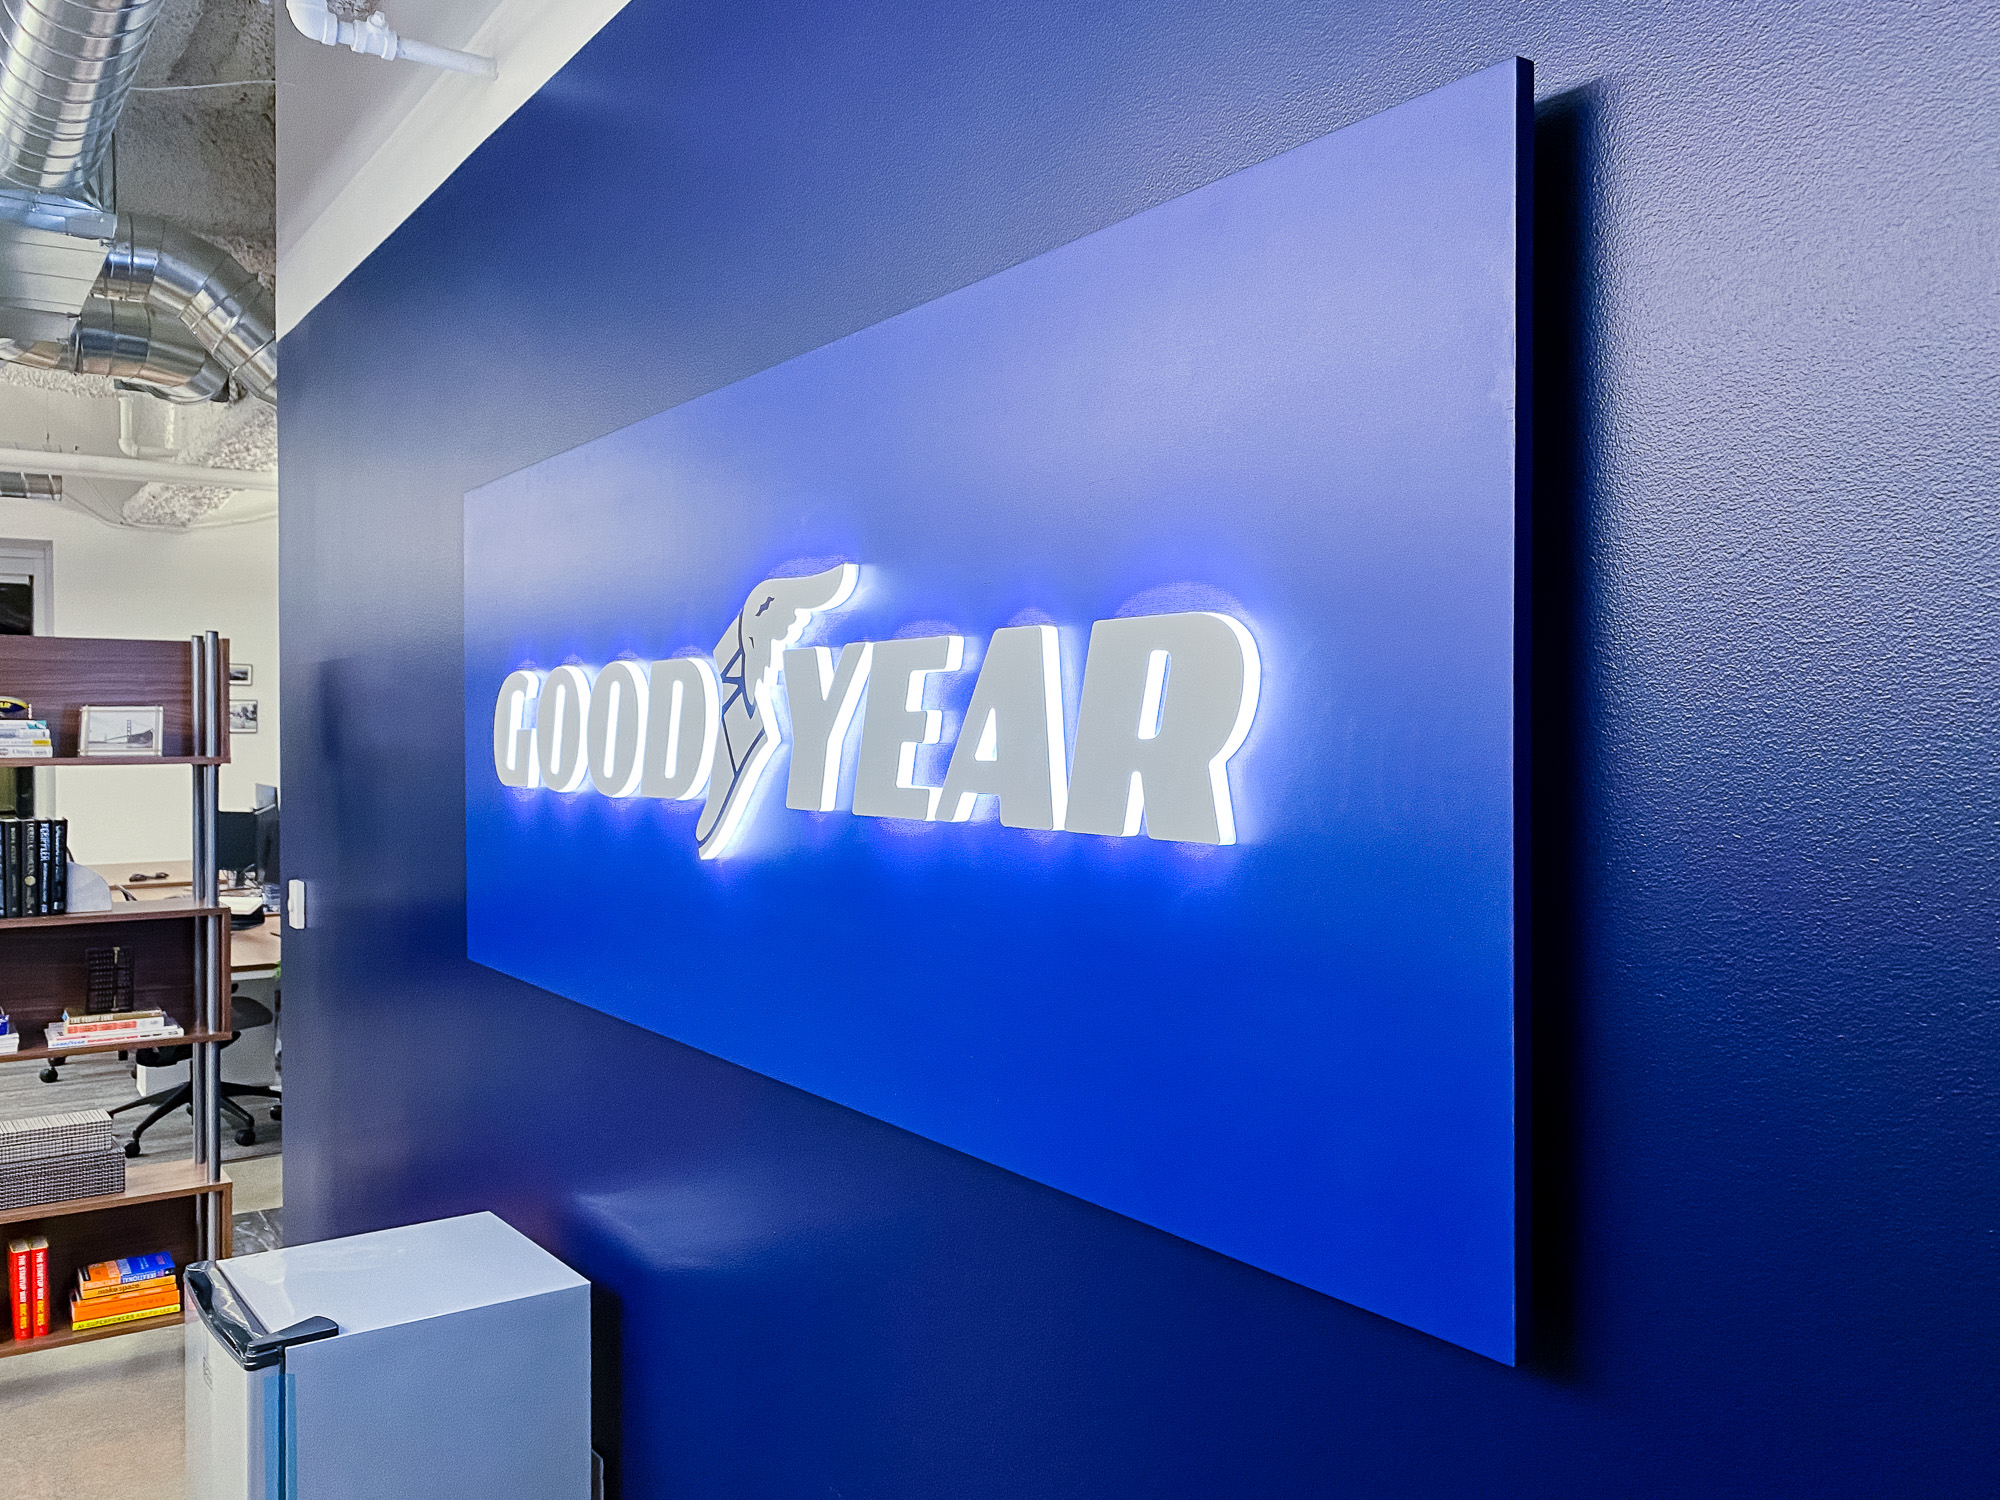 Illuminated, blue, edge-lit lobby sign behind reception desk for the San Francisco office of Goodyear, a tire manufacturer.